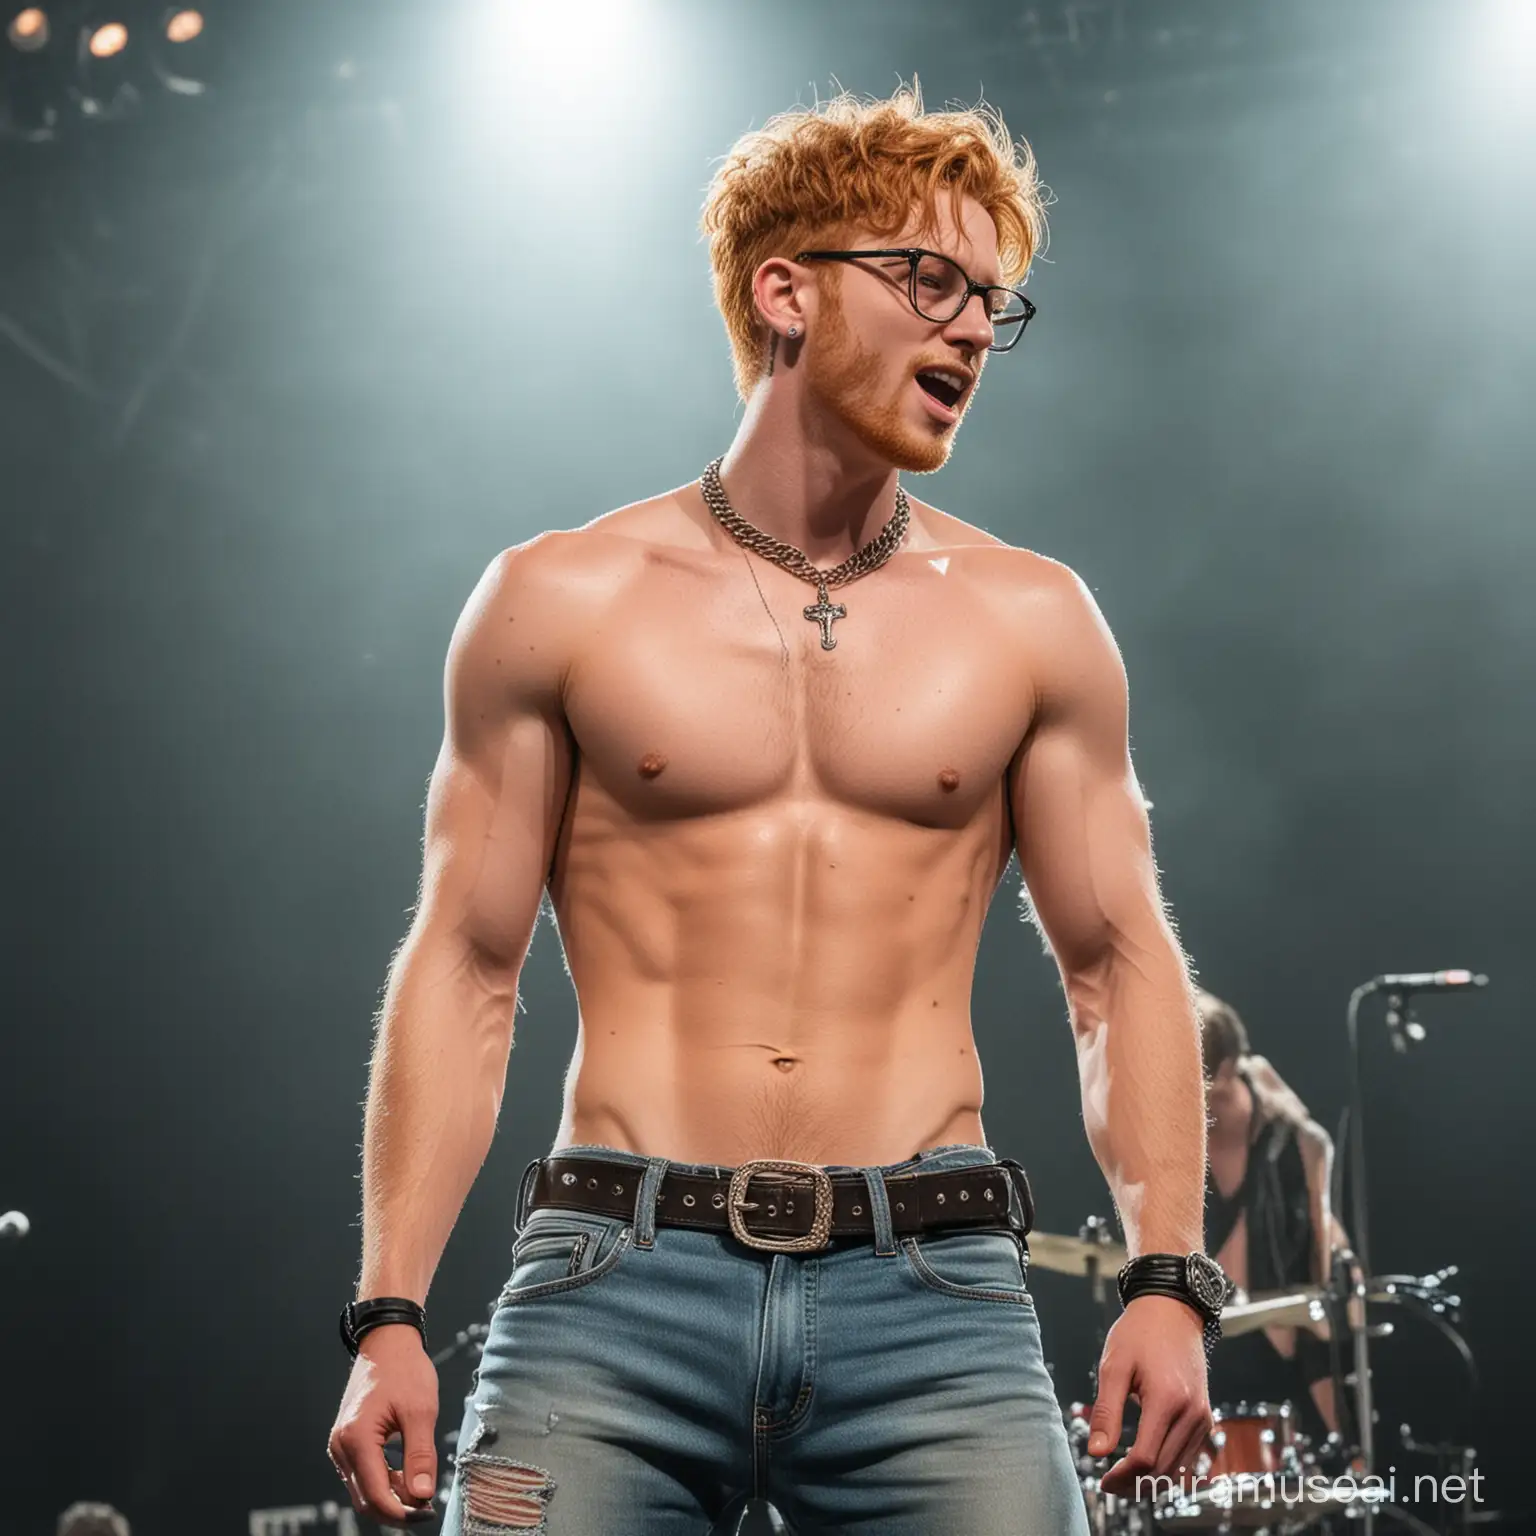 Seductive Shirtless Vocalists Rock Concert with Ginger Accents